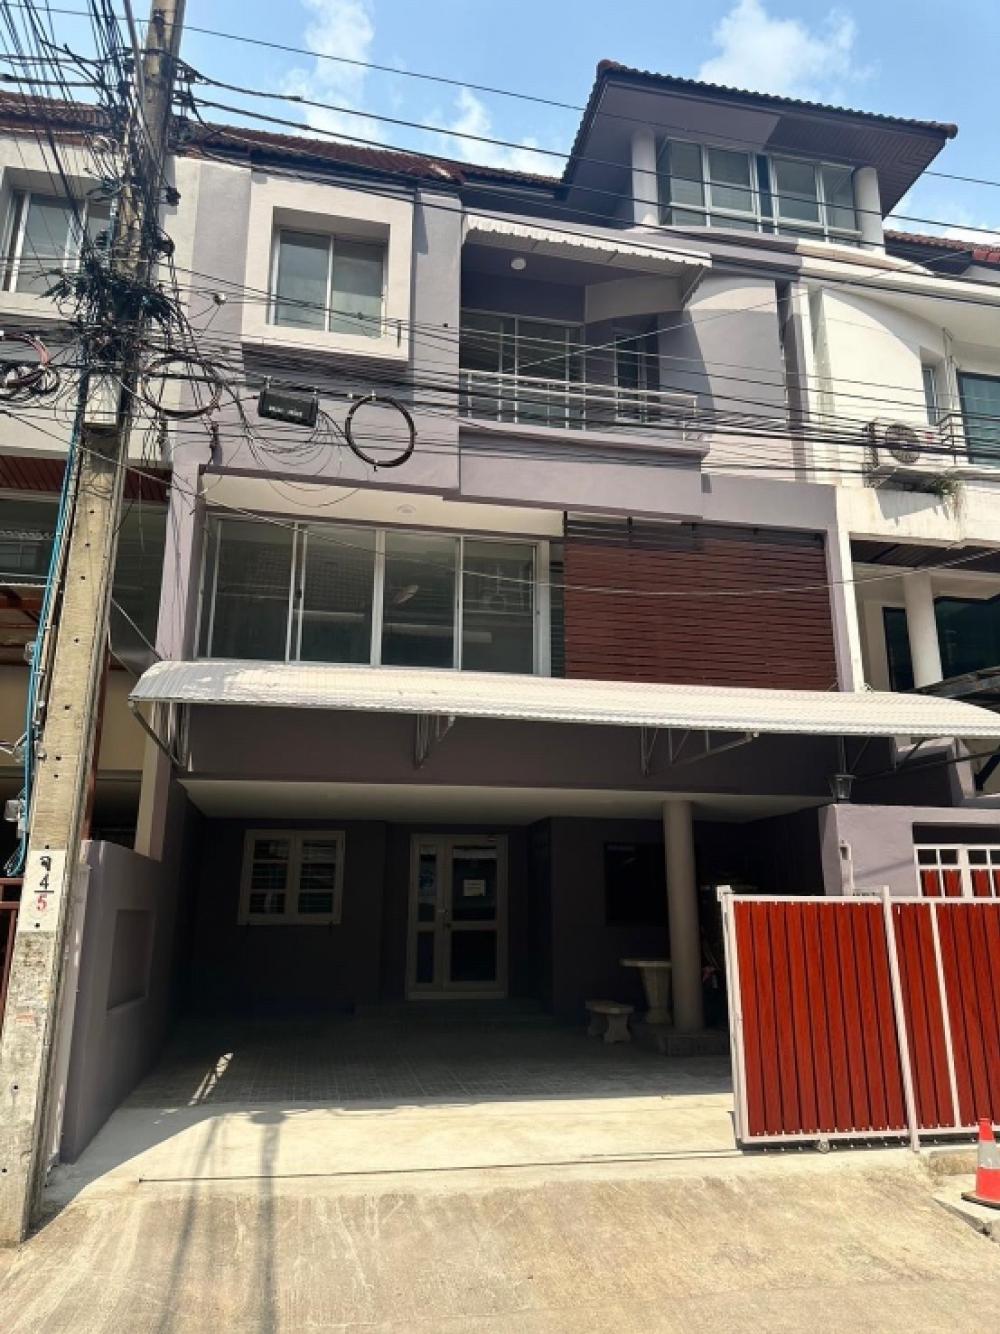 For RentTownhouseLadprao, Central Ladprao : Home office for rent, 4 floors, 26 sq m (townhouse), newly renovated, 3 bedrooms, 6 bathrooms, 2 offices, newly painted. Laying new tiles Beautiful and modern Ready to move in on Lat Phrao Road 80.